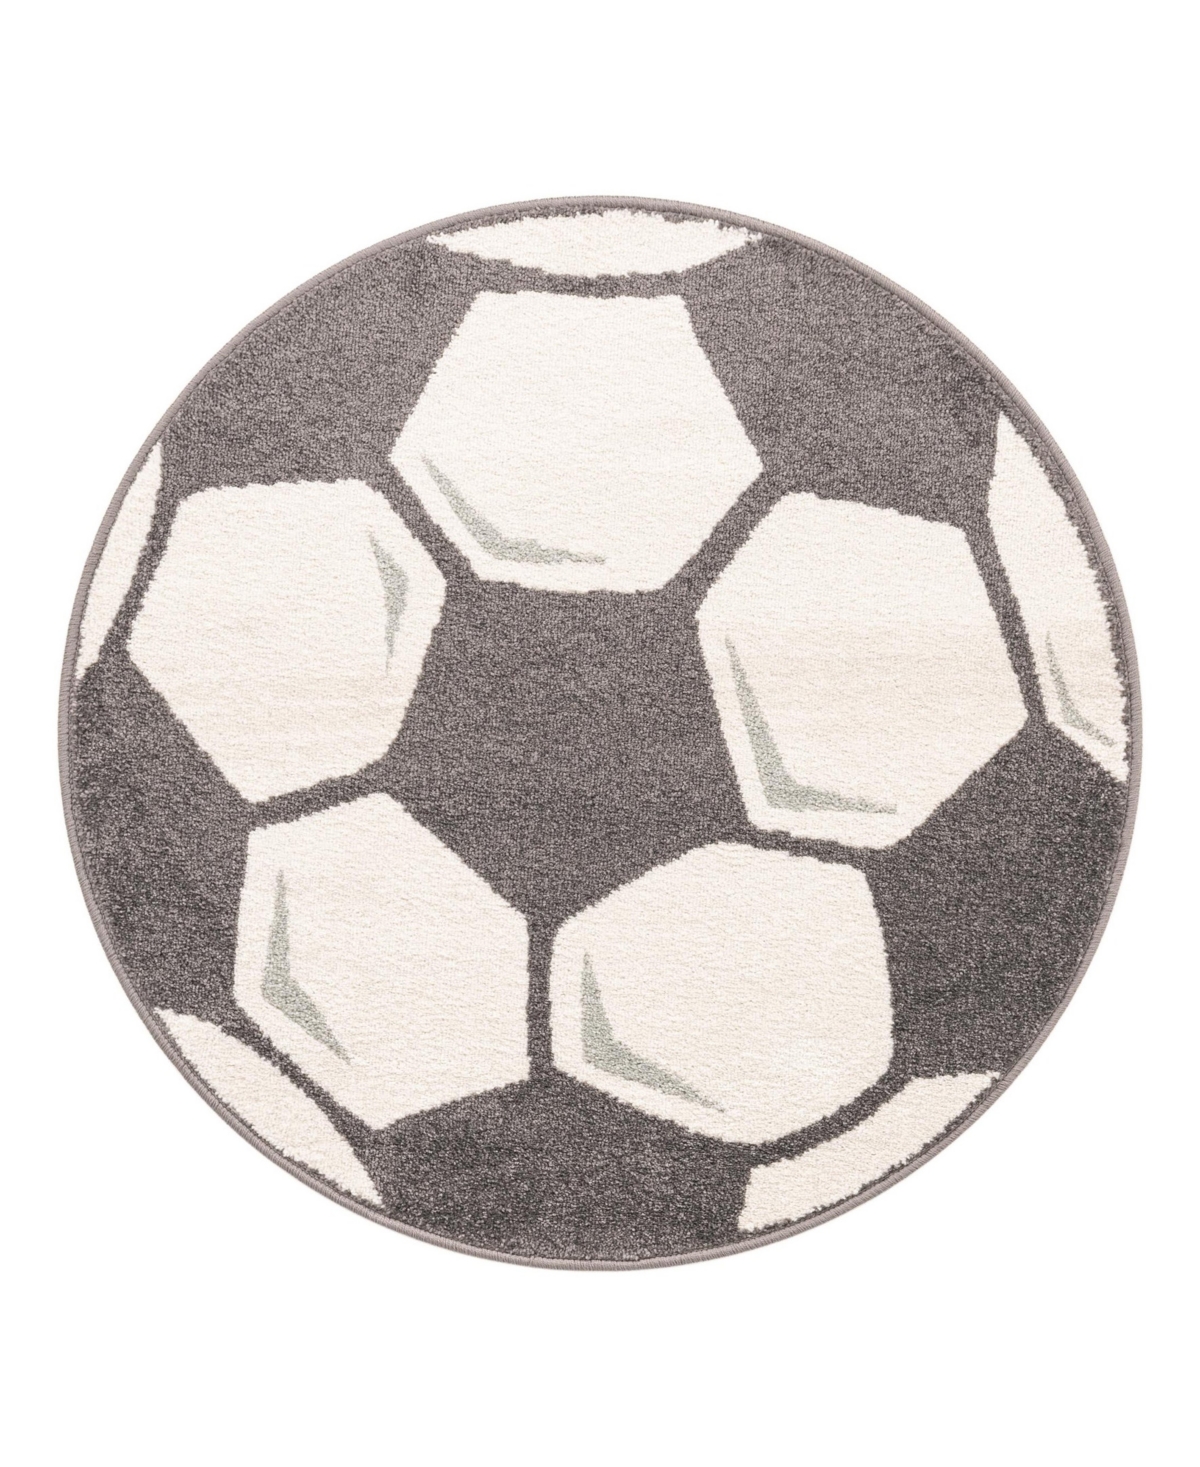 Bayshore Home Campy Kids Soccer Ball 3'3" X 3'3" Round Area Rug In Black